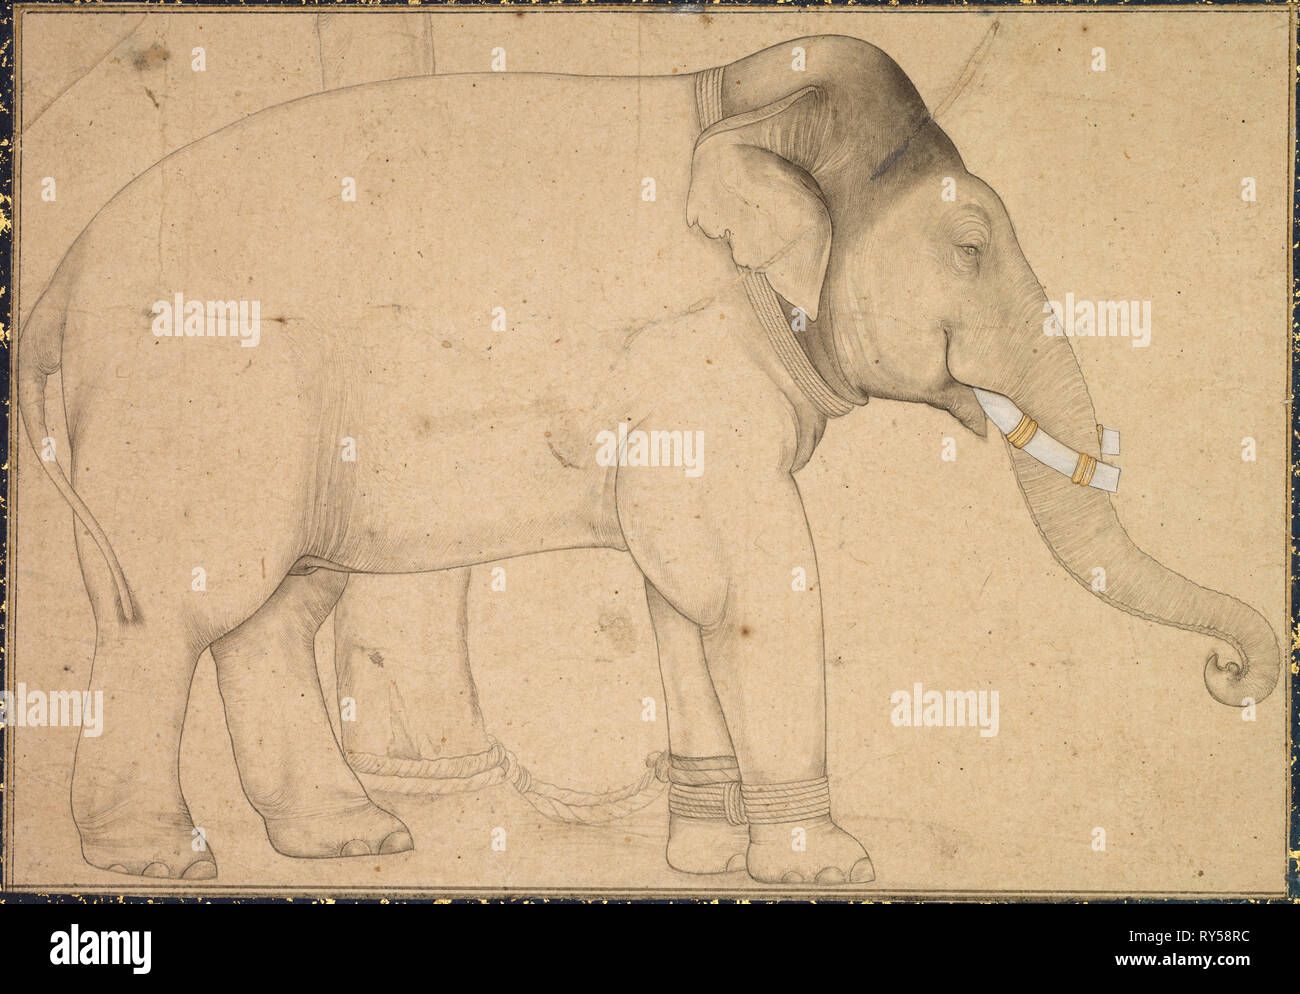 Drawing of an Elephant, c. 1700. India, Mughal School, early 18th Century. Ink on paper; image: 12.8 x 18.1 cm (5 1/16 x 7 1/8 in.); overall: 20 x 25.3 cm (7 7/8 x 9 15/16 in Stock Photo